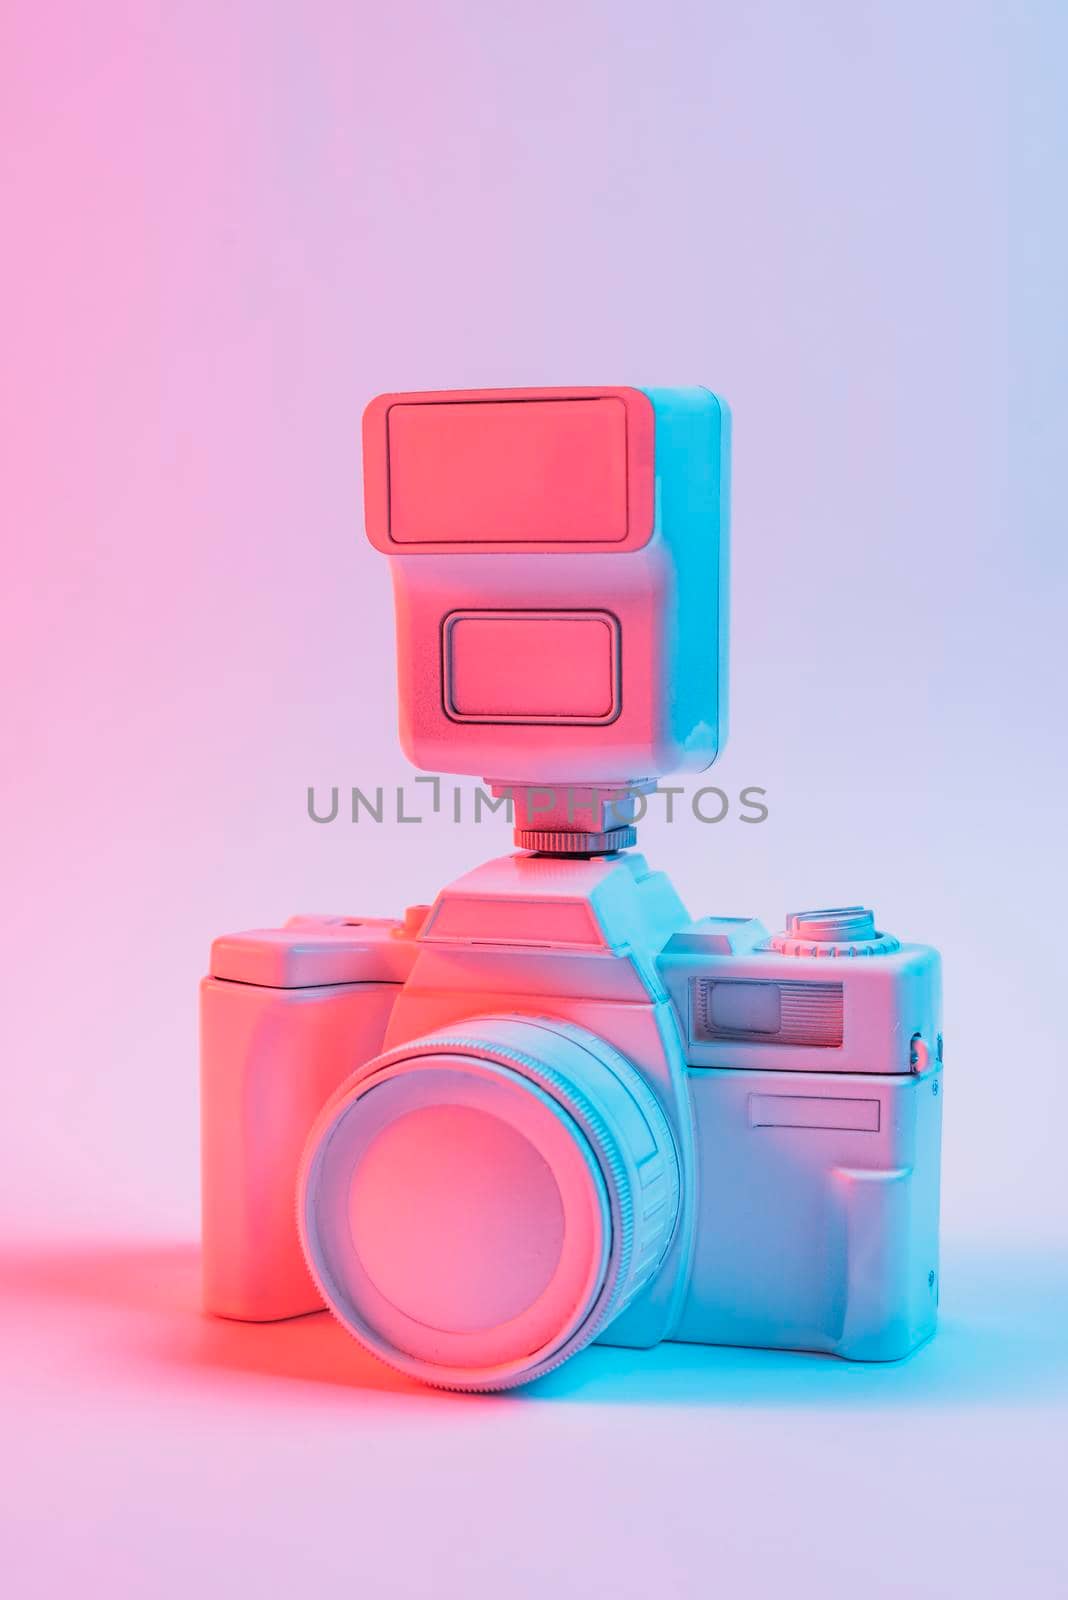 vintage pink painted camera lens against pink backdrop. High quality photo by Zahard